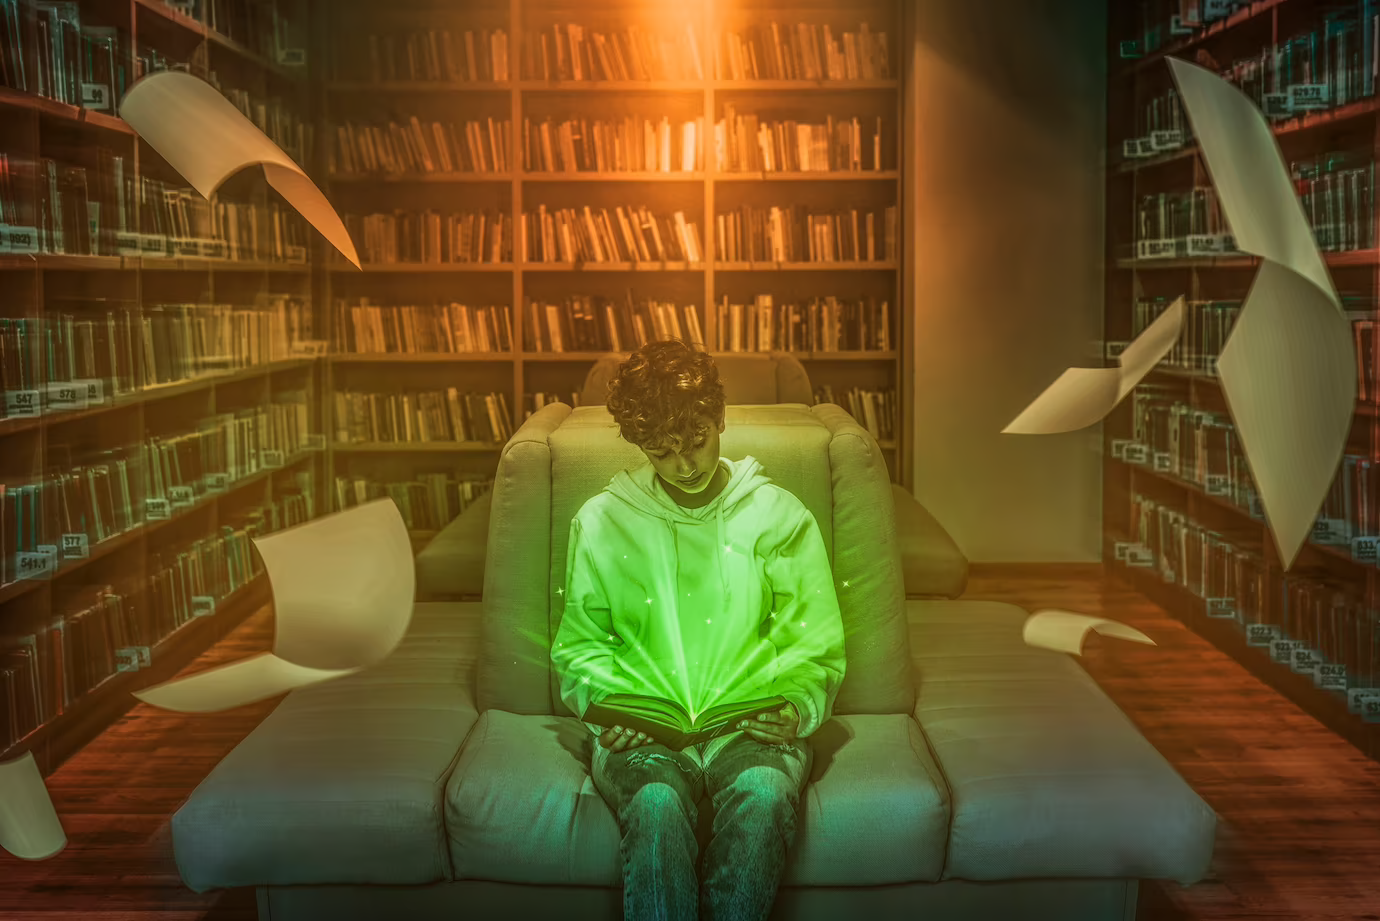 A front view of a student engrossed in reading a book from the Ultimate Oxford Reading Lists: Expert Recommendations for Every Genre. The student is sitting in a comfortable chair, holding the book in his hands and focusing intently on the pages.